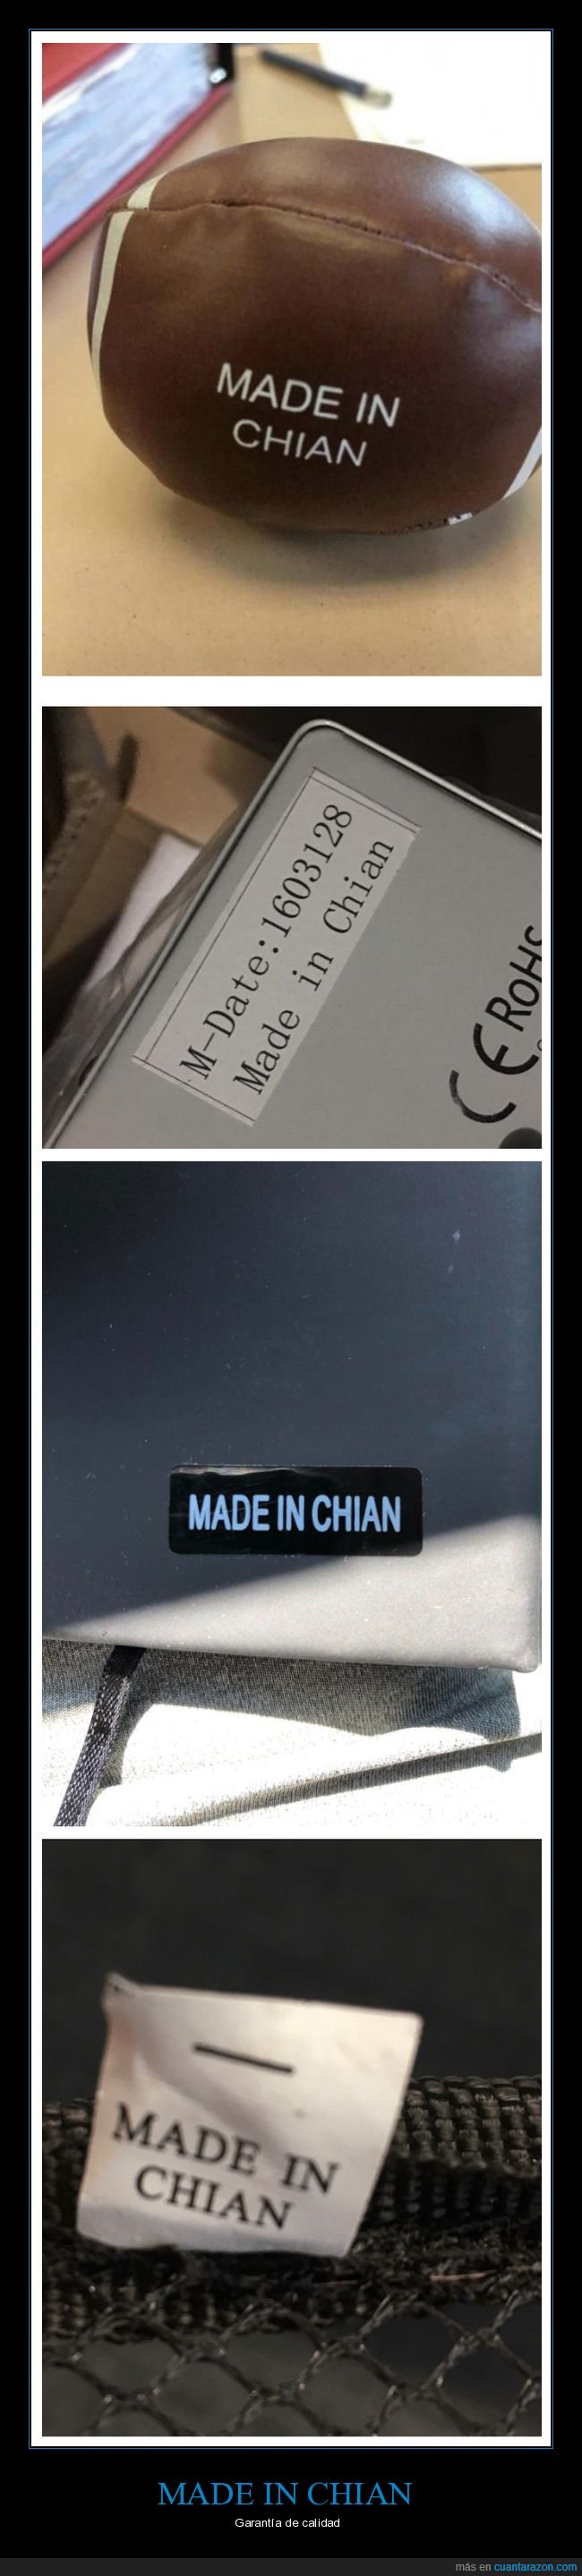 made in china,made in chian,fails